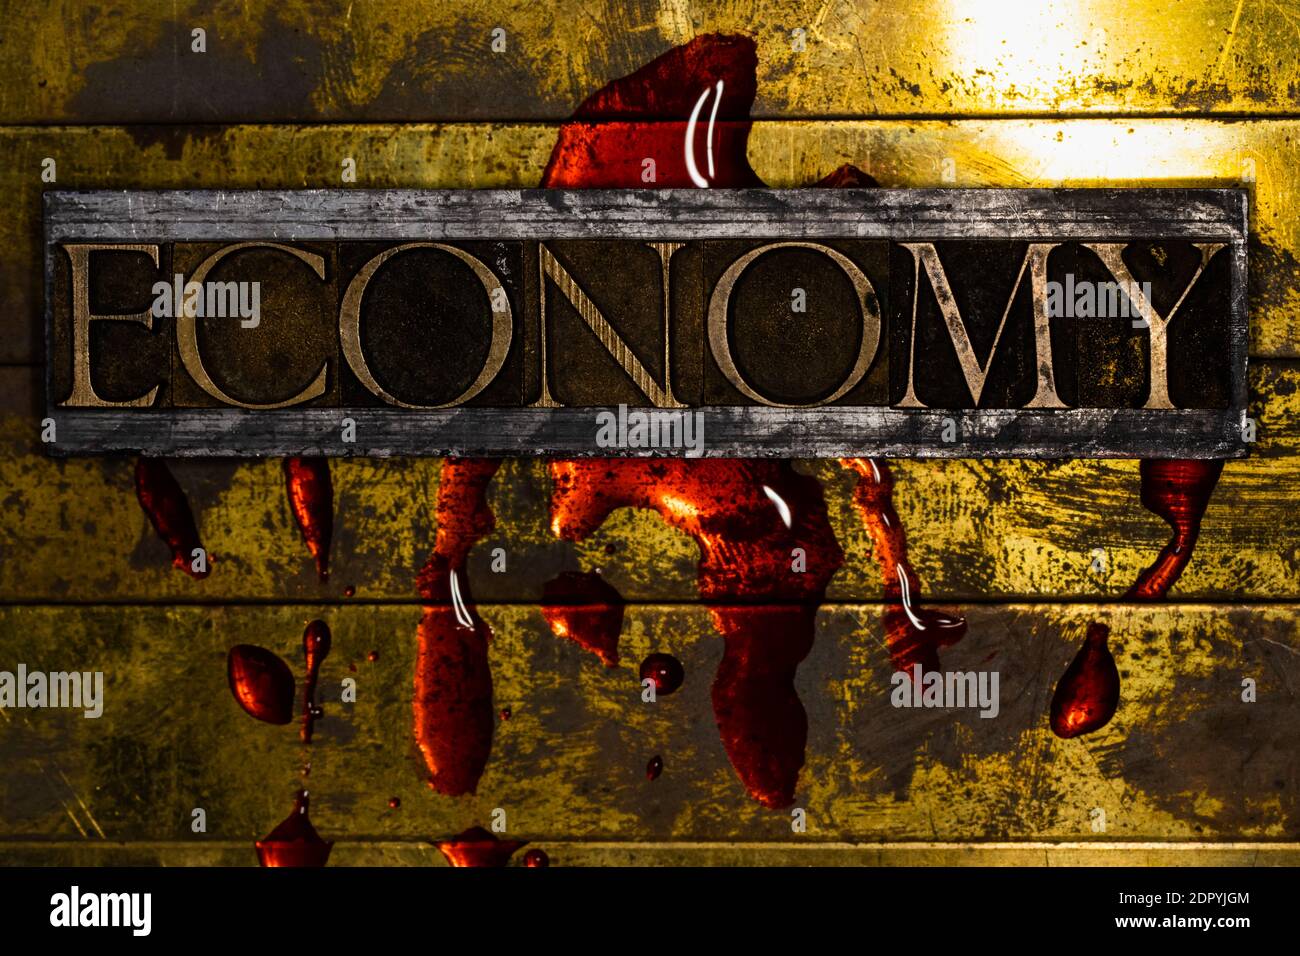 Economy text bleeding on grunge textured copper and gold background with copy space symbolizing economic collapse Stock Photo